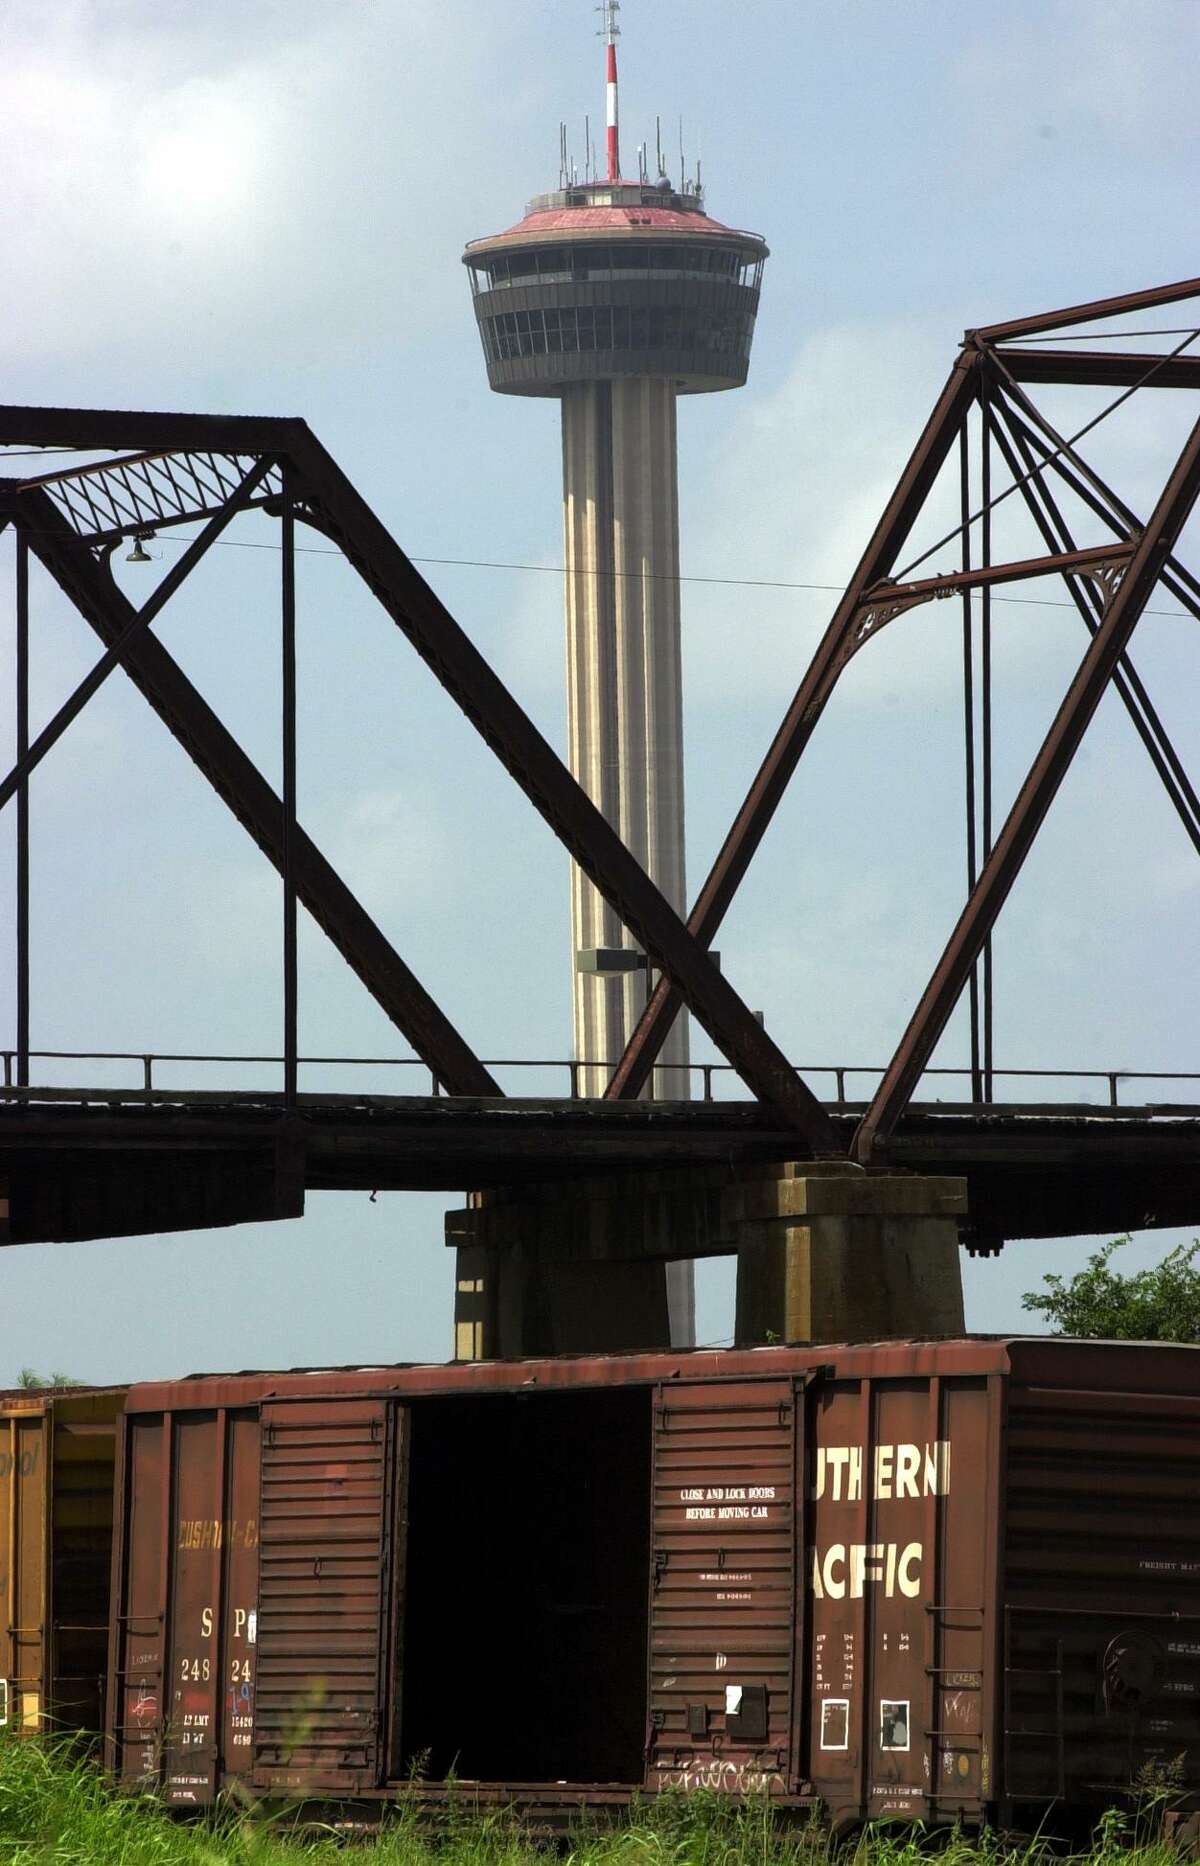 METRO...The Hays street bridge which is located in the near Eastside is pictured Friday June 23, 2000 in San Antonio, Texas. The bridge has two structual styles Pratt to the left and Phoenix to the right has been standing since 1908. Photo by JOEY GARCIA/STAFF